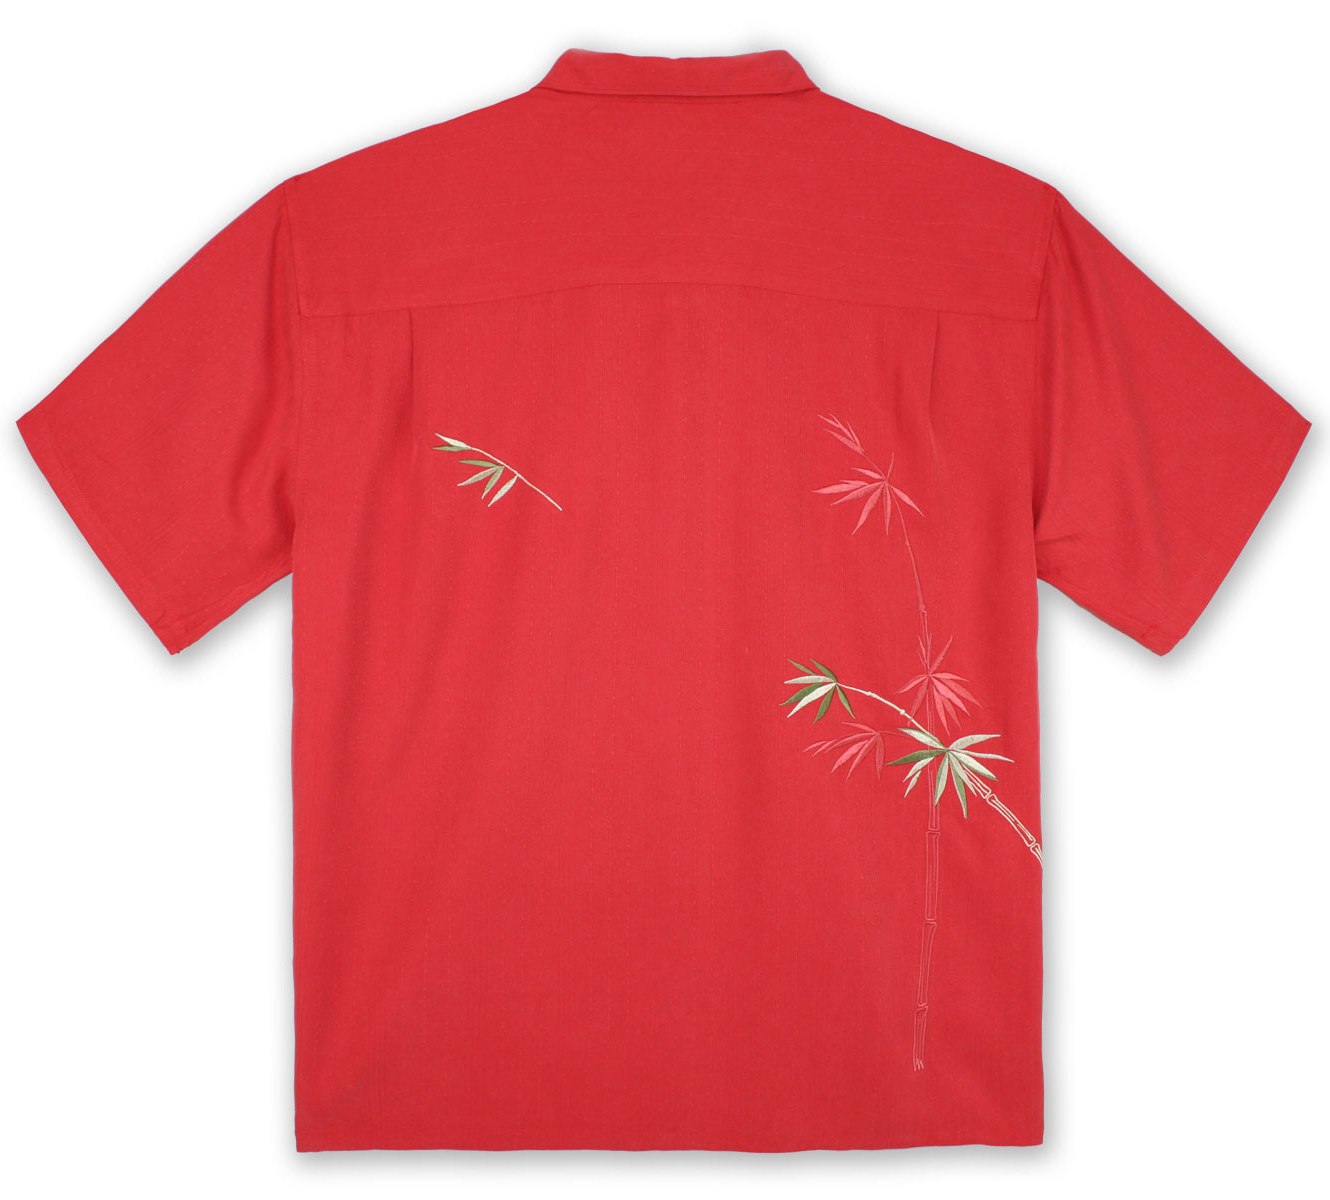 bamboo-cay-mens-shirt-flying-bamboo-tomato-red-back-view